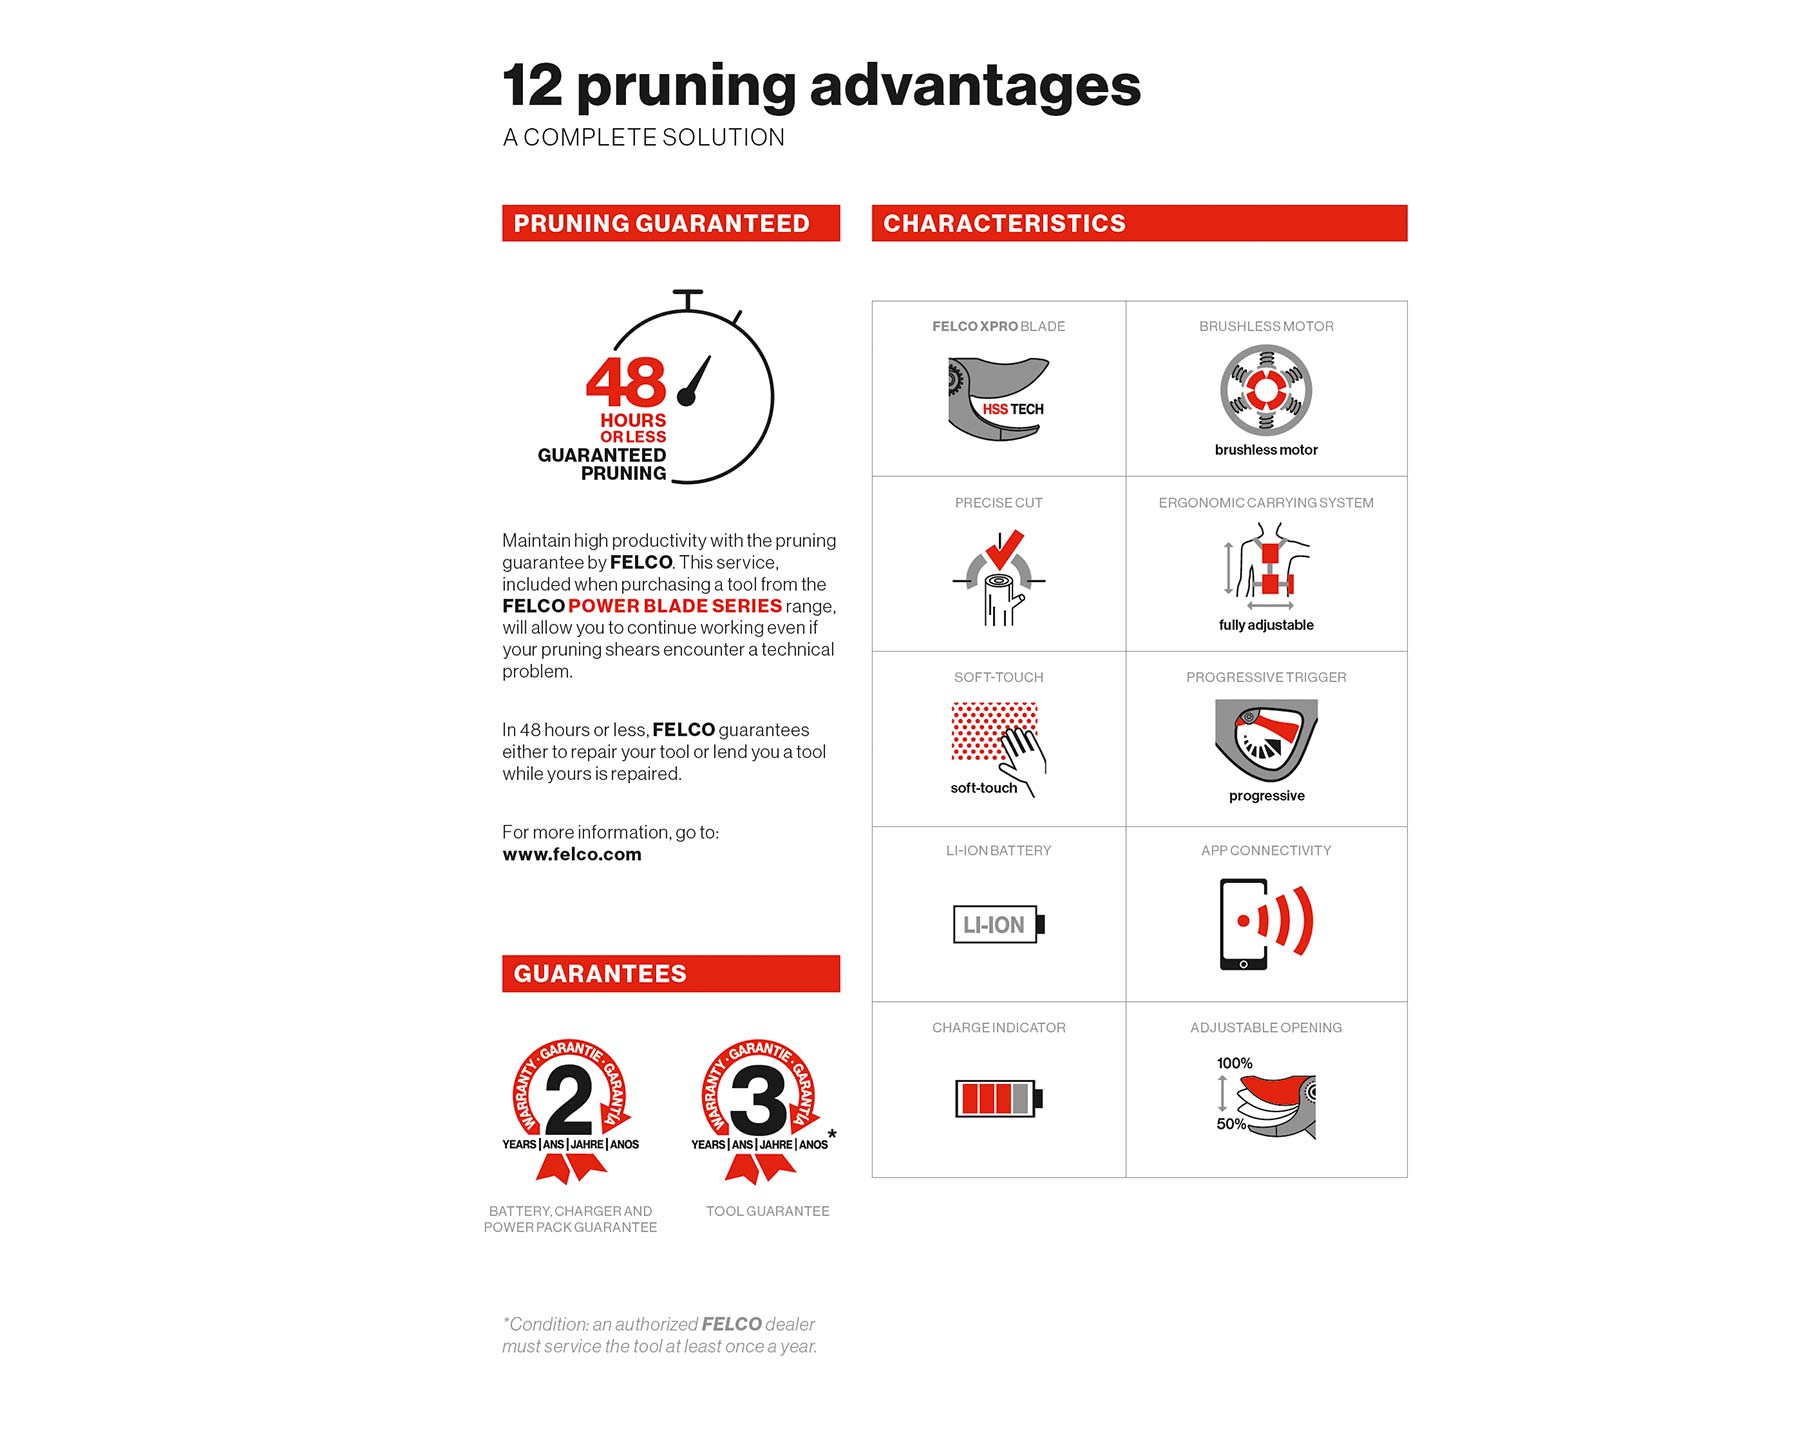 12 advantages to using Felco Power Blade Electric Pruning Shears